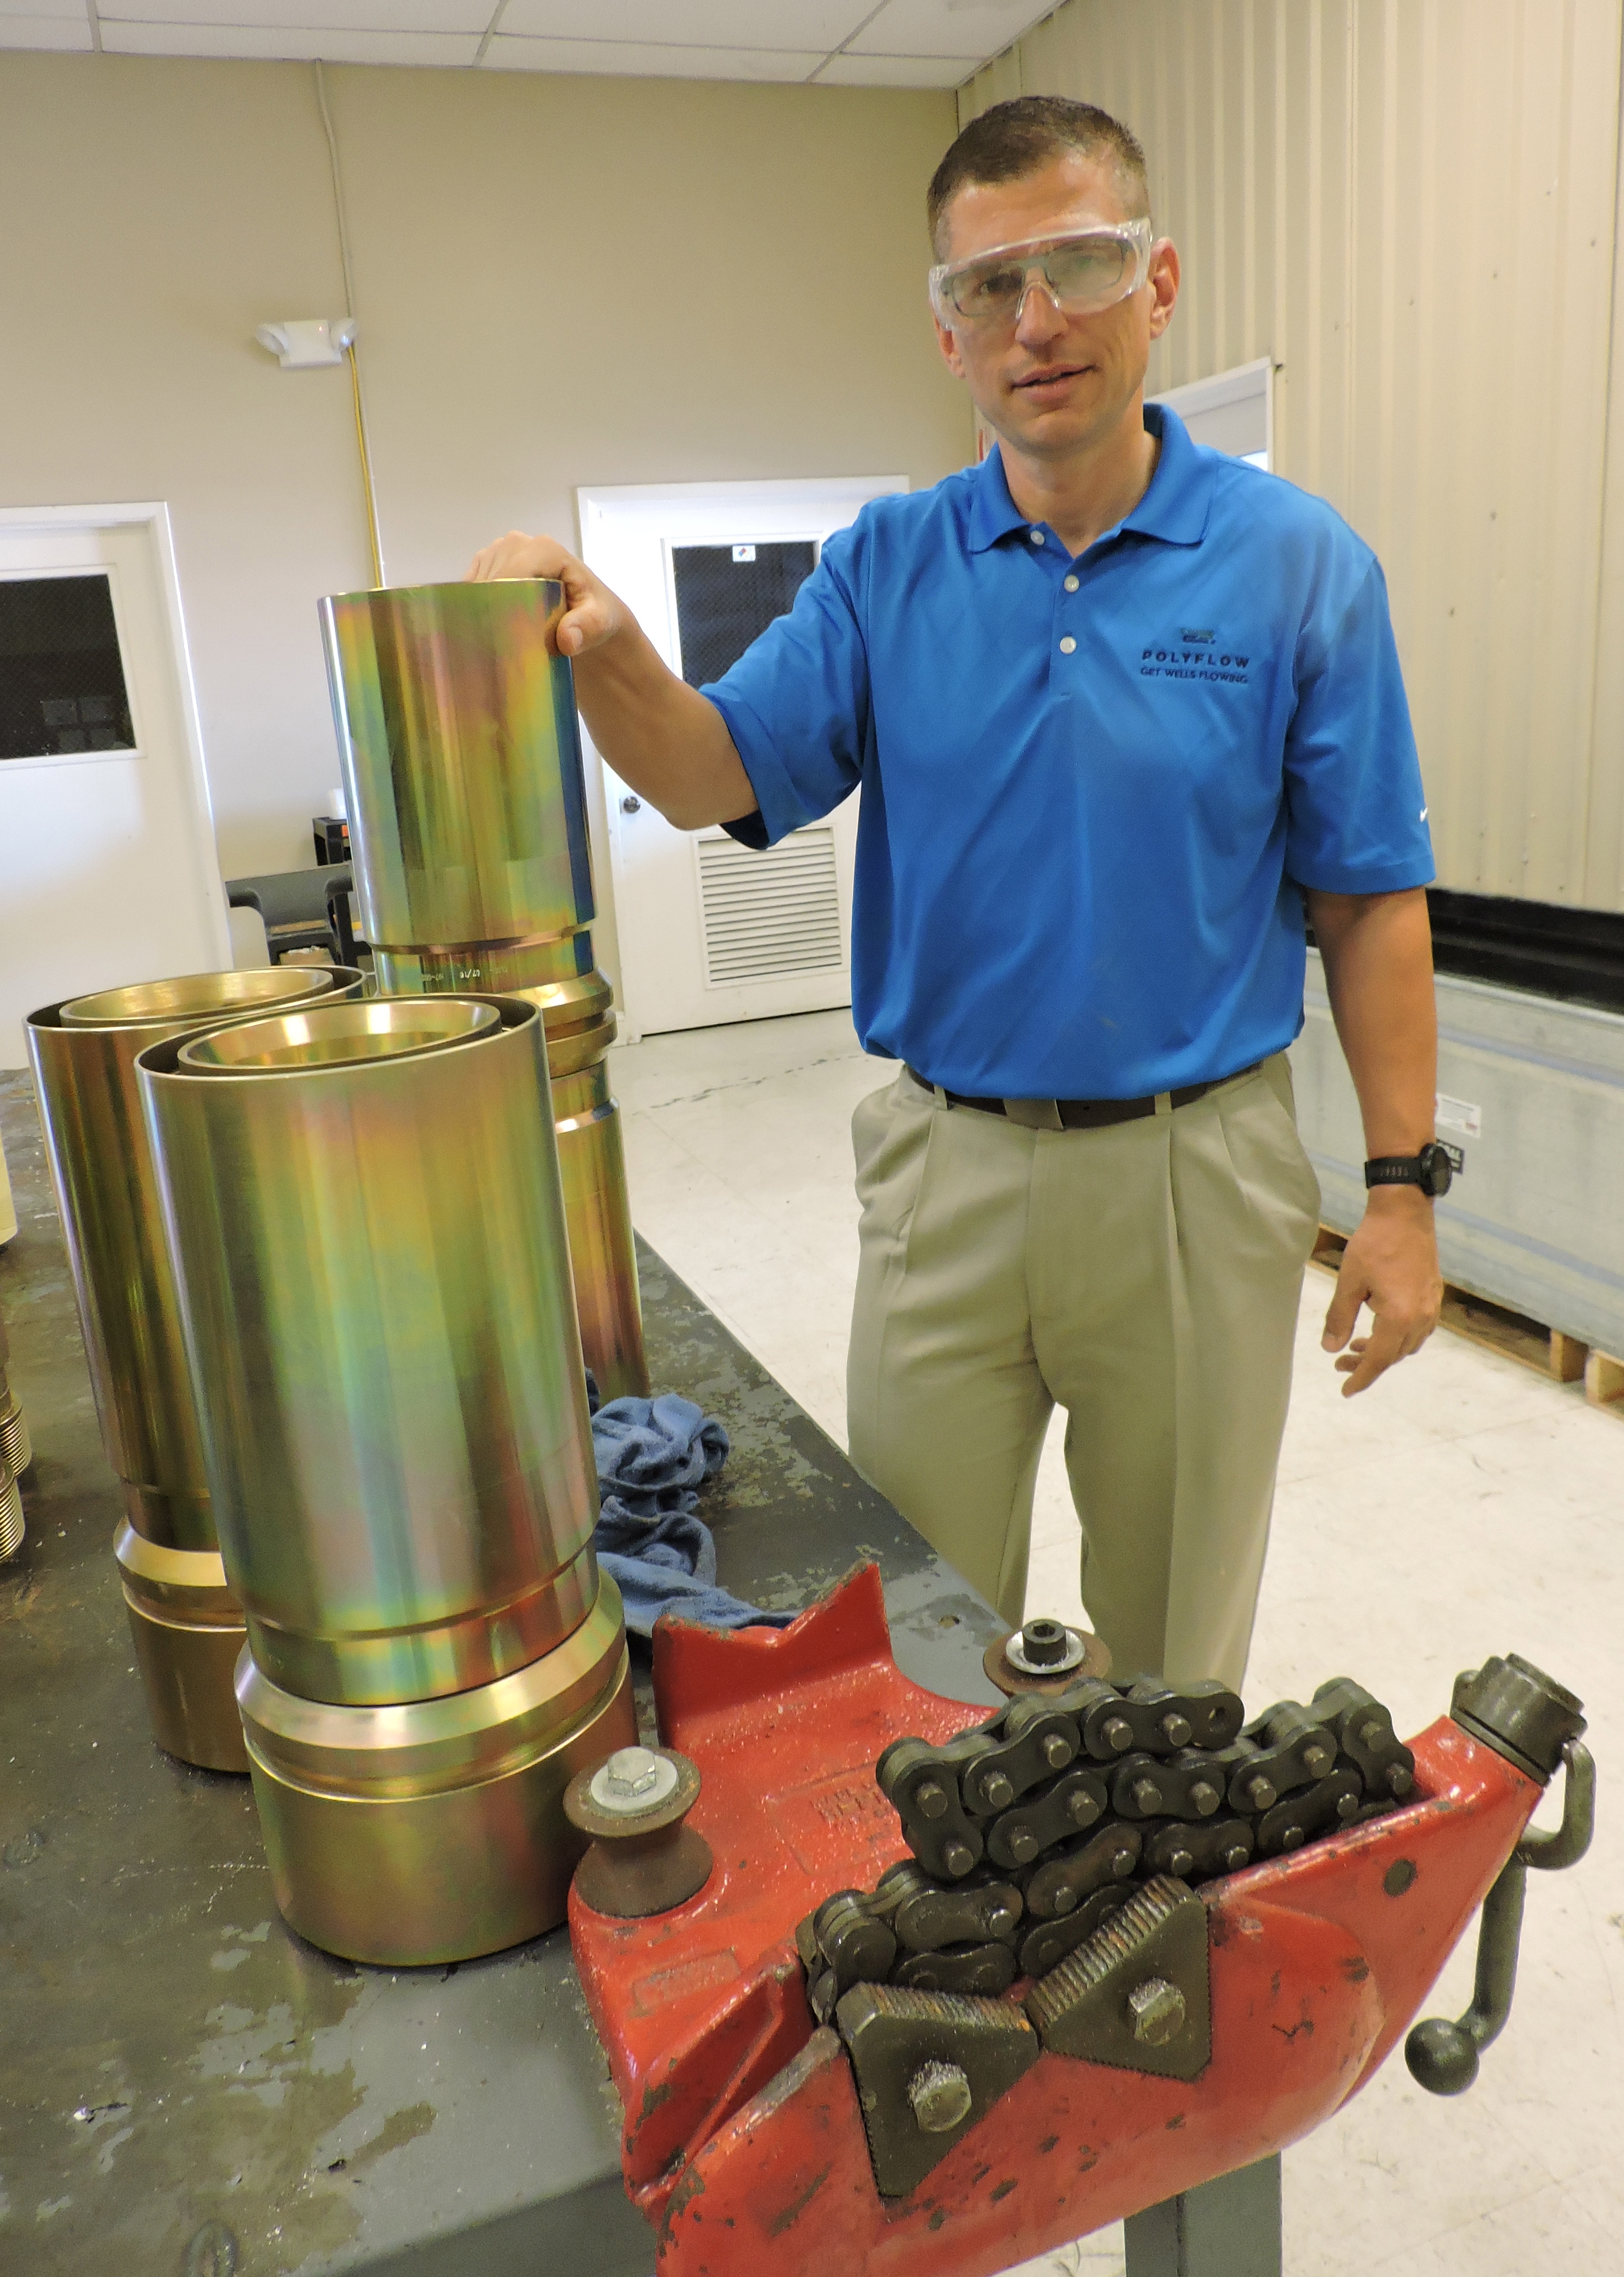 Aramid fiber reinforces Polyflow’s Thermoflex spoolable pipe. Holding a spool is Jeremy Hohn, U.S. director of sales for the company.